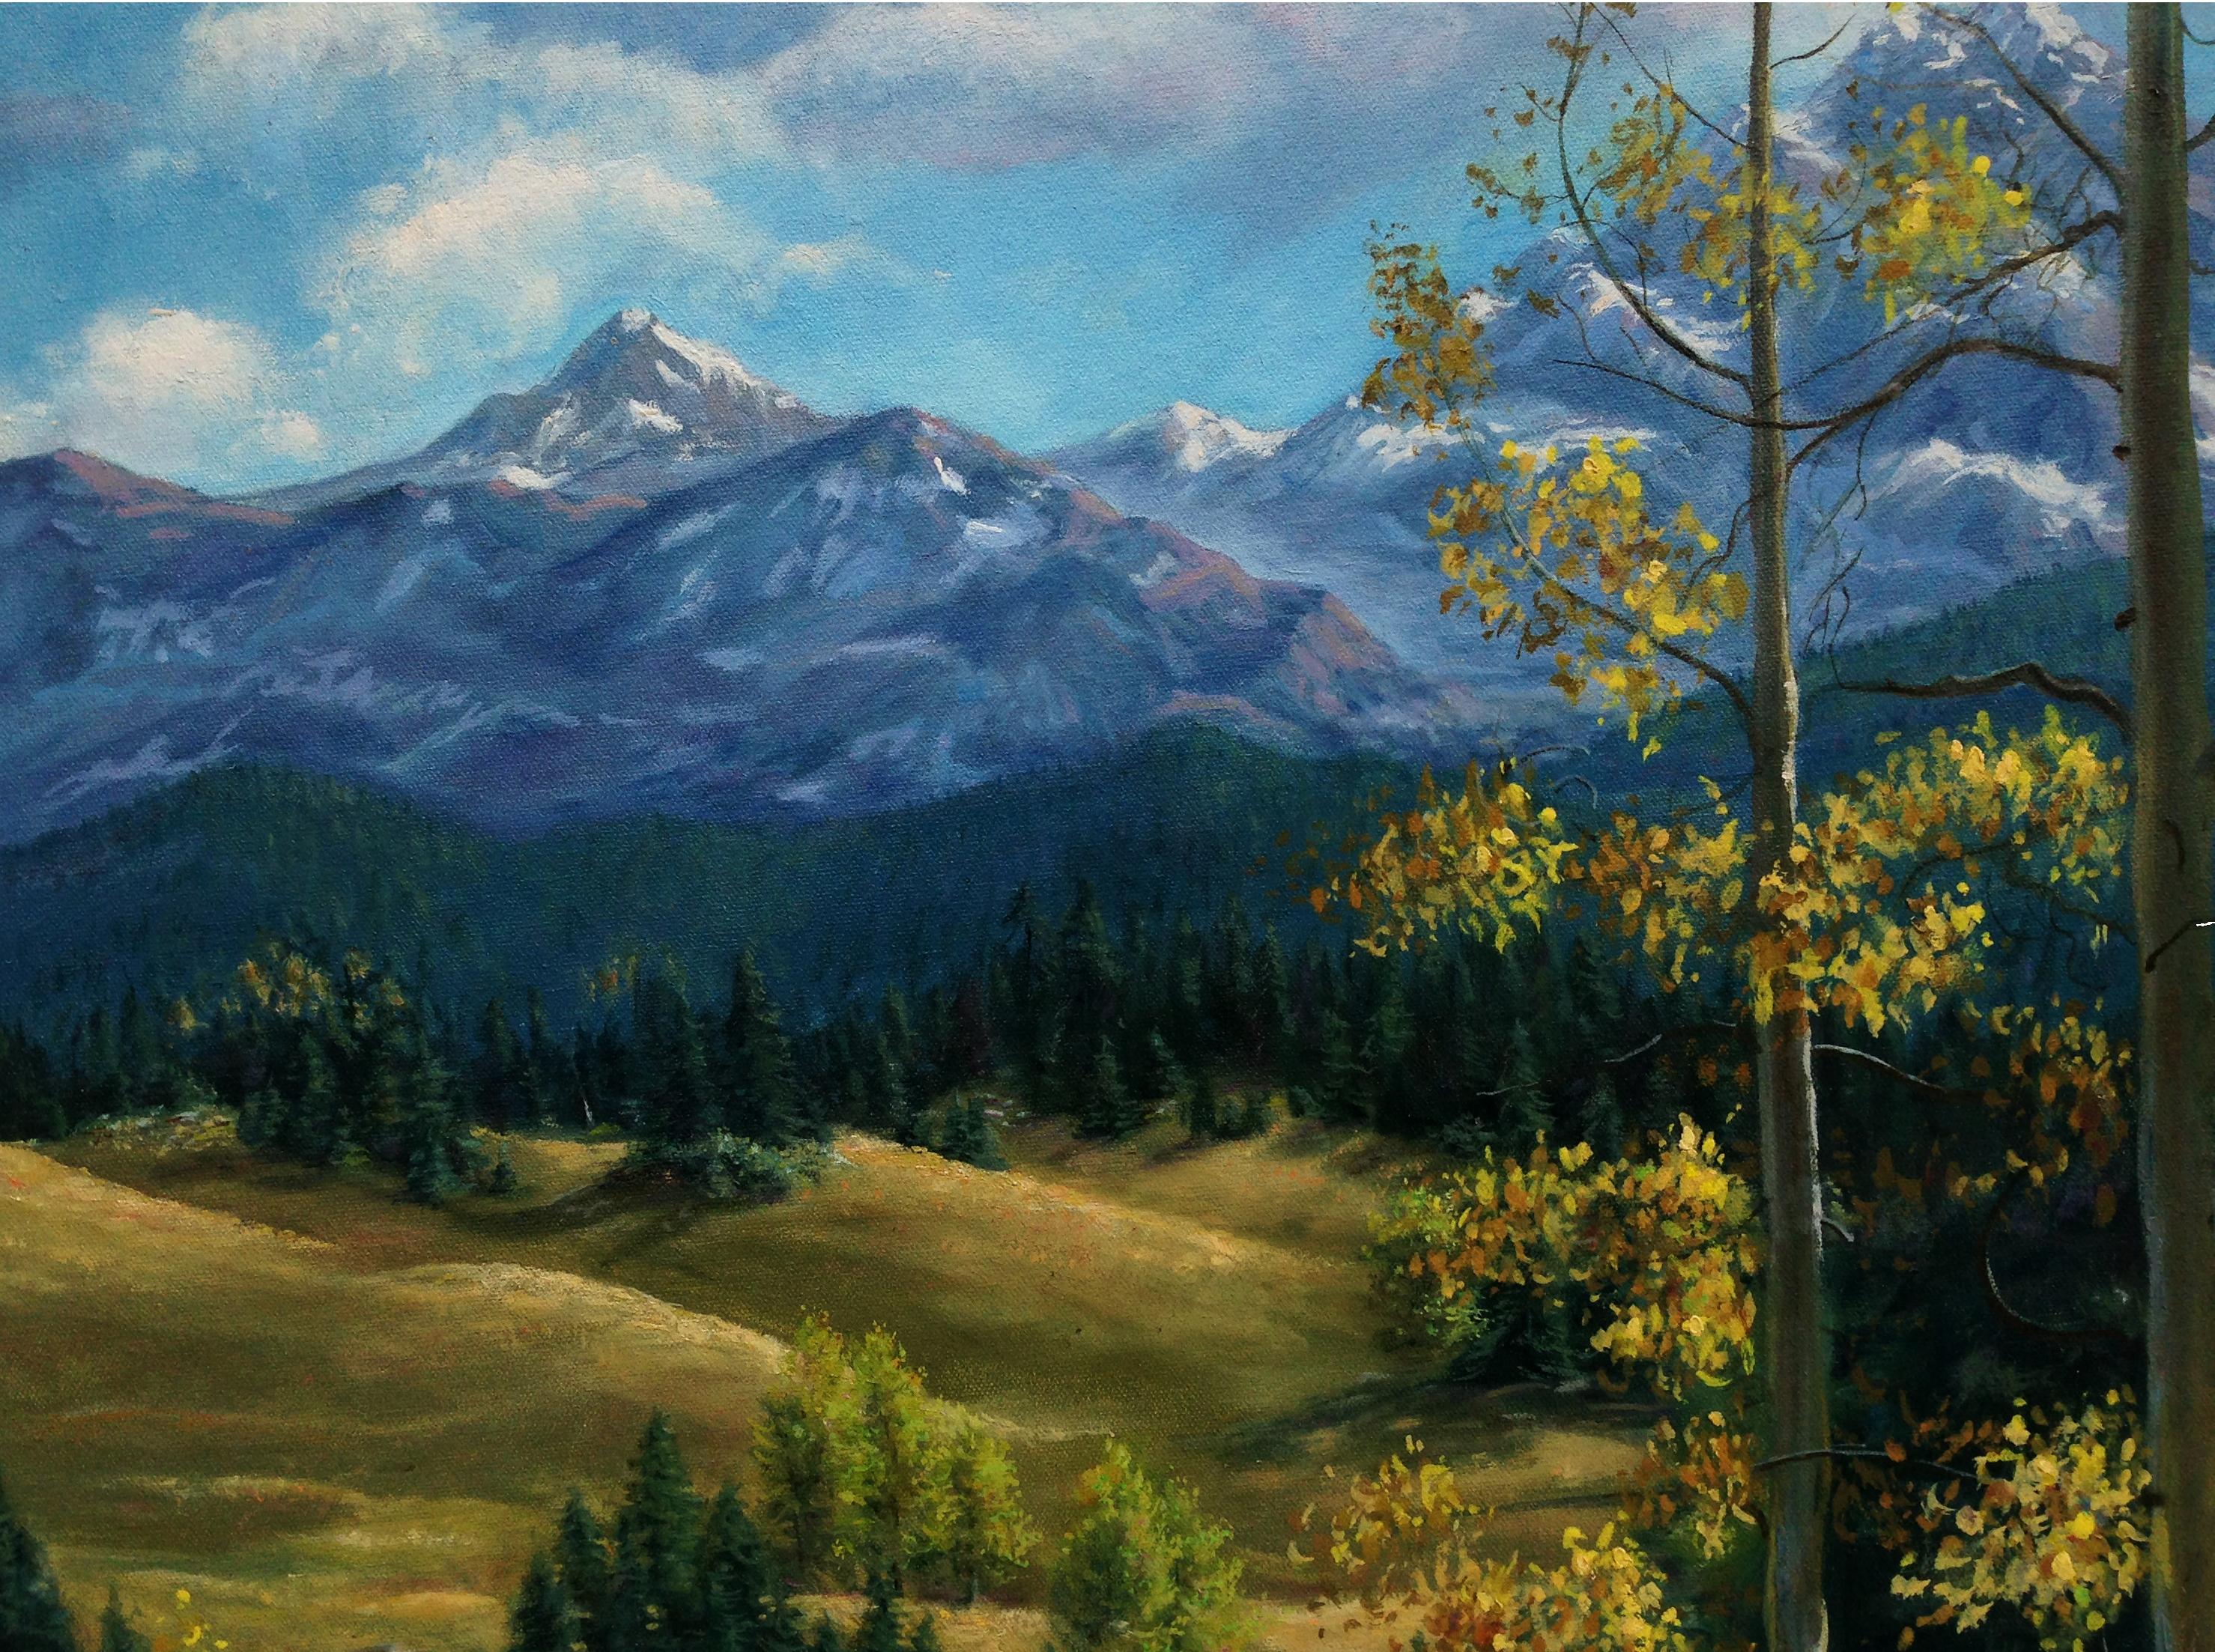 Sierra Mountains in Autumn - Landscape in Oil on Oval Canvas - Realist Painting by W. R. Rolls